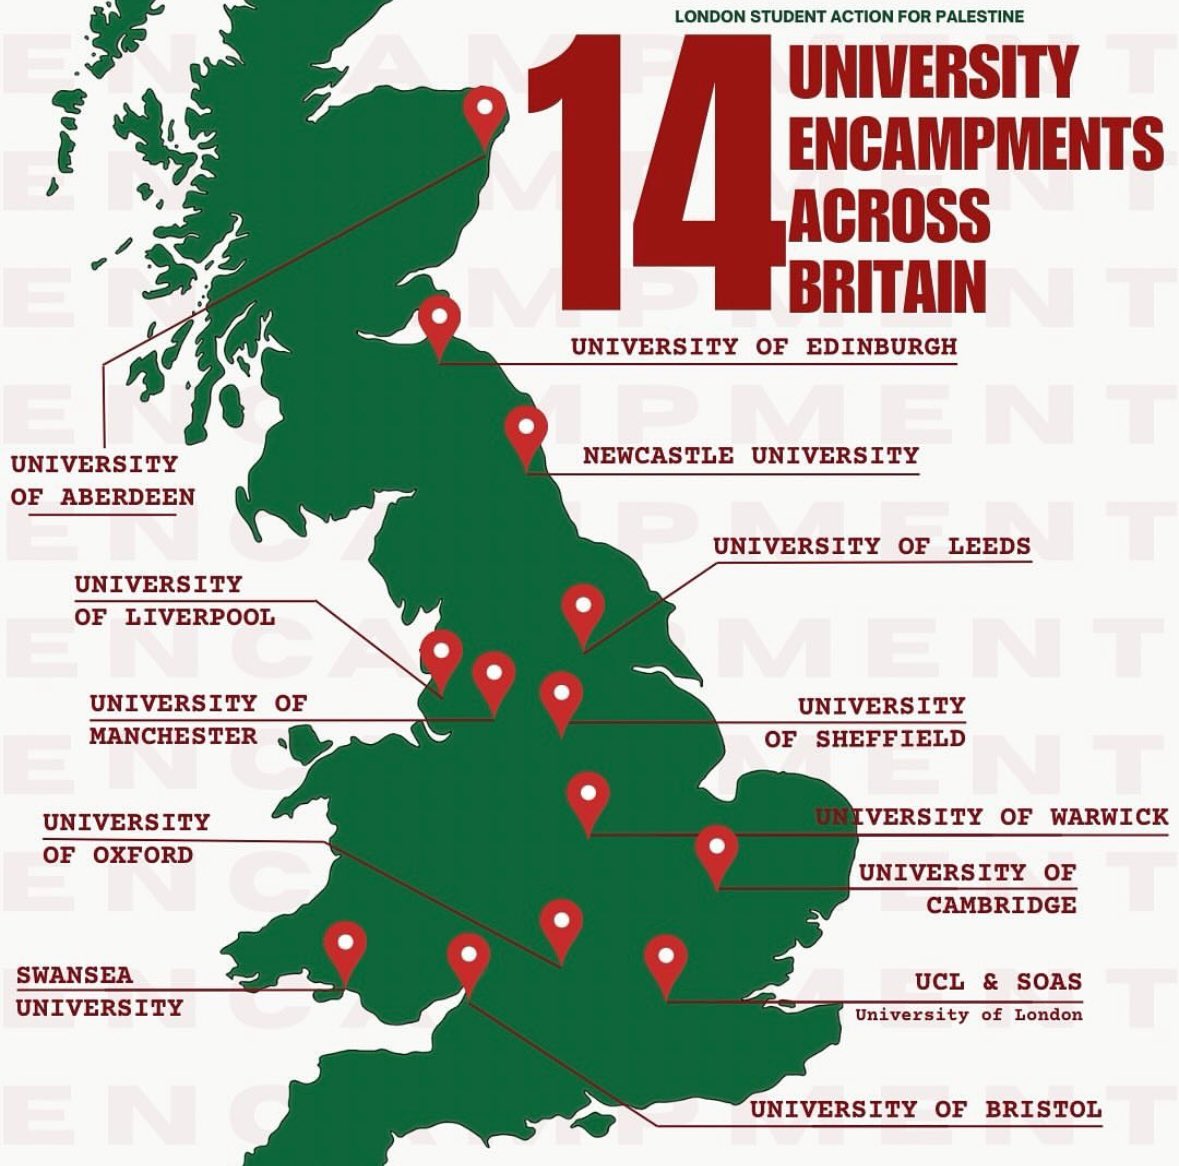 “What are UK students doing for Gaza?”